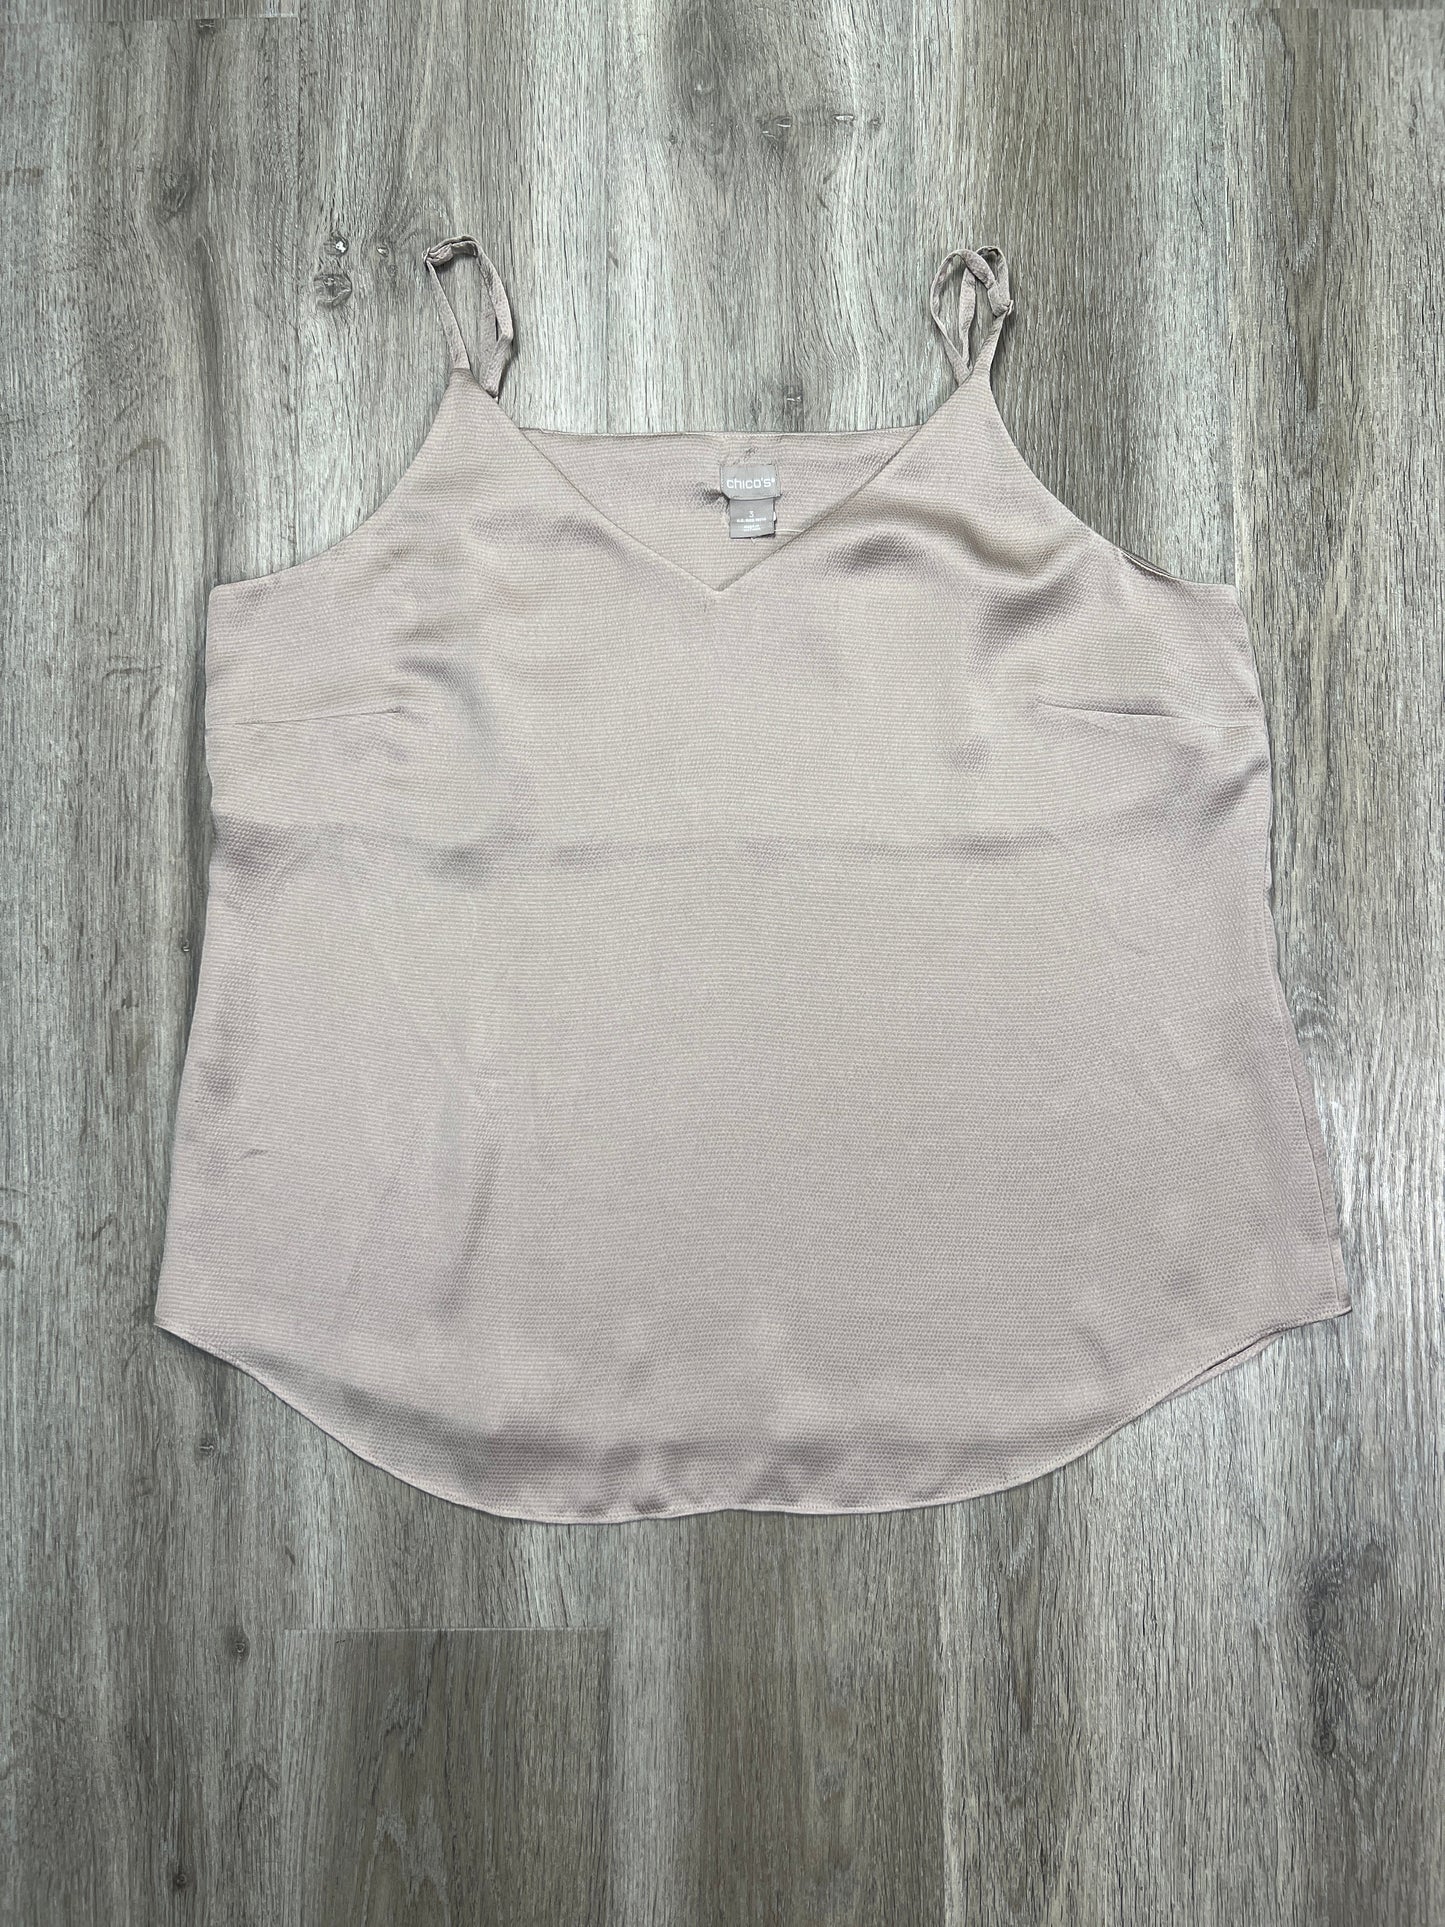 Taupe Tank Top Chicos, Size Xl